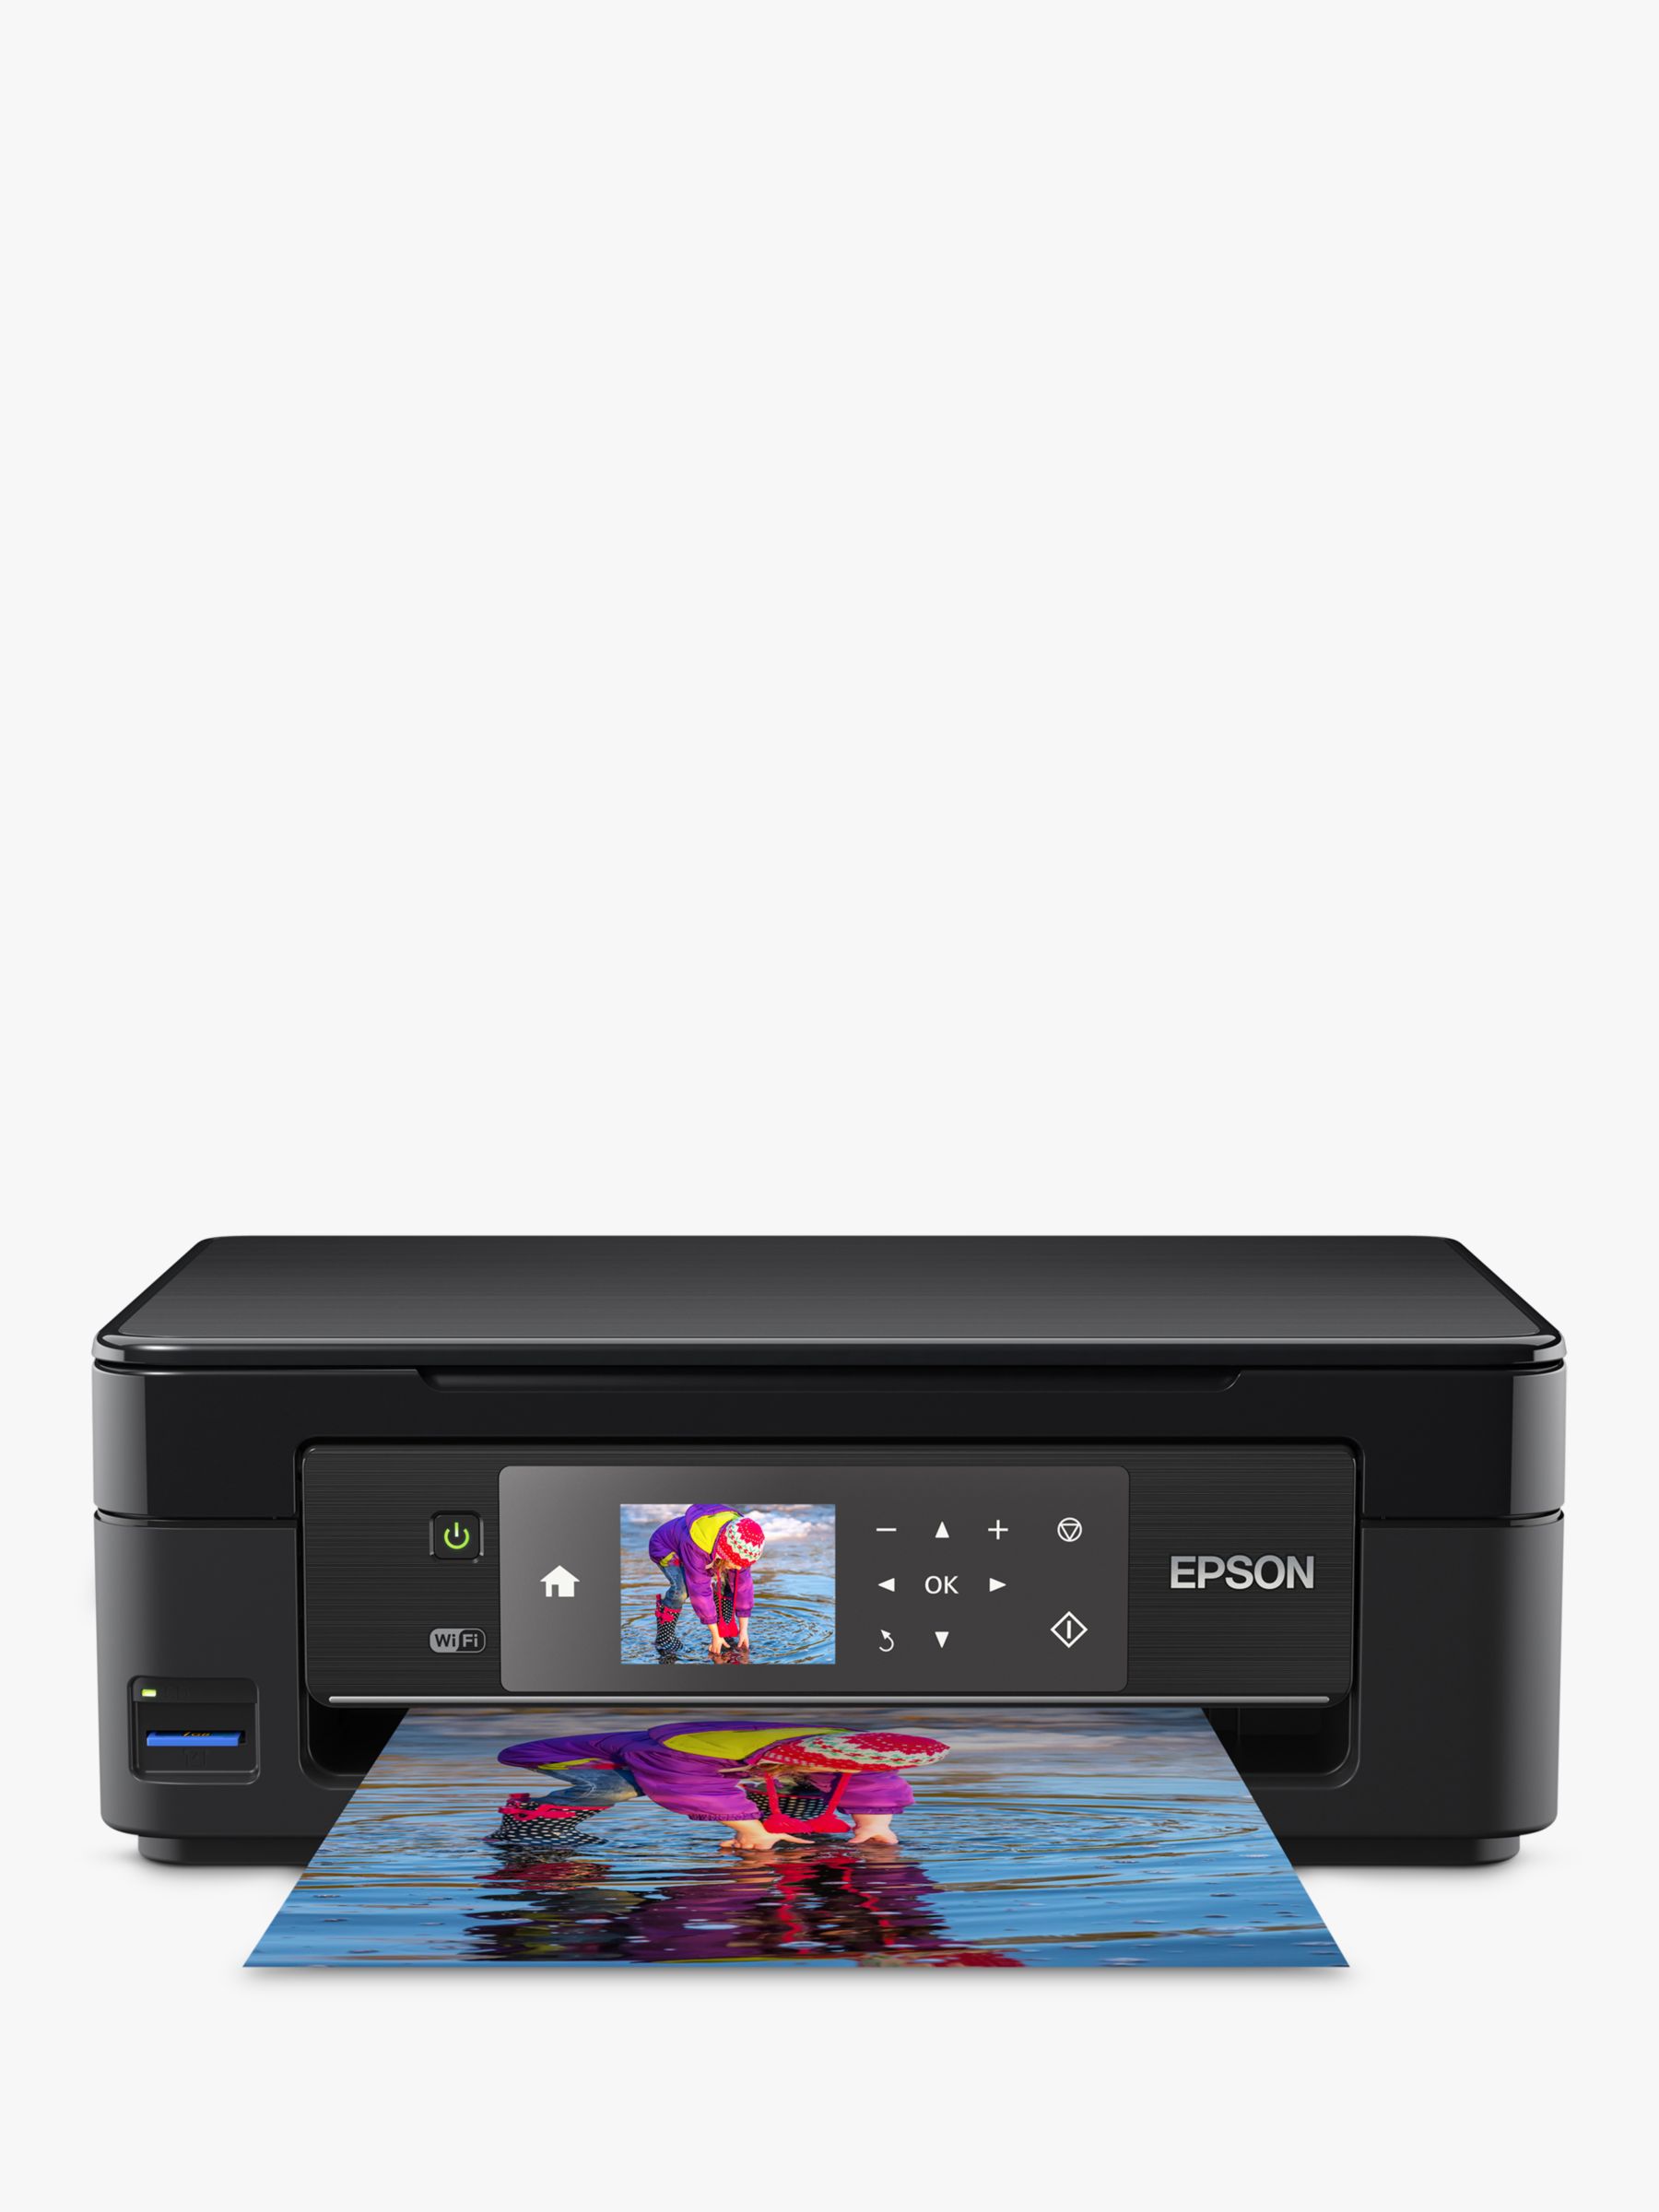 Epson Expression XP-452 Wi-Fi All-in-One Printer, Black